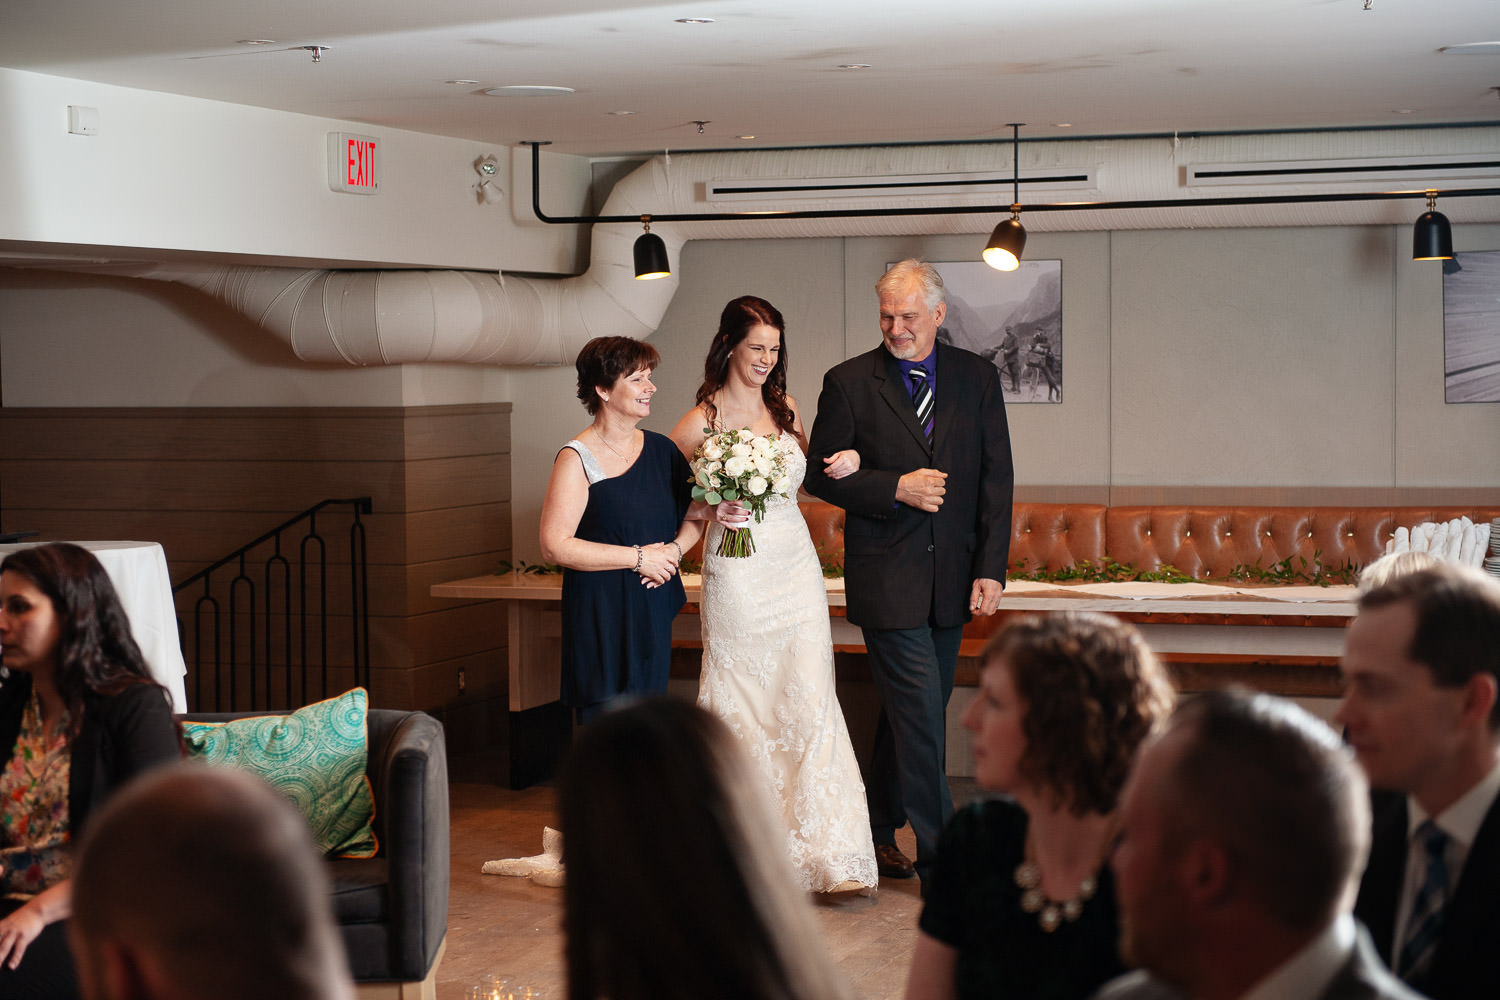 Bride walks down the aisle at her intimate wedding in Calgary captured by Tara Whittaker Photography